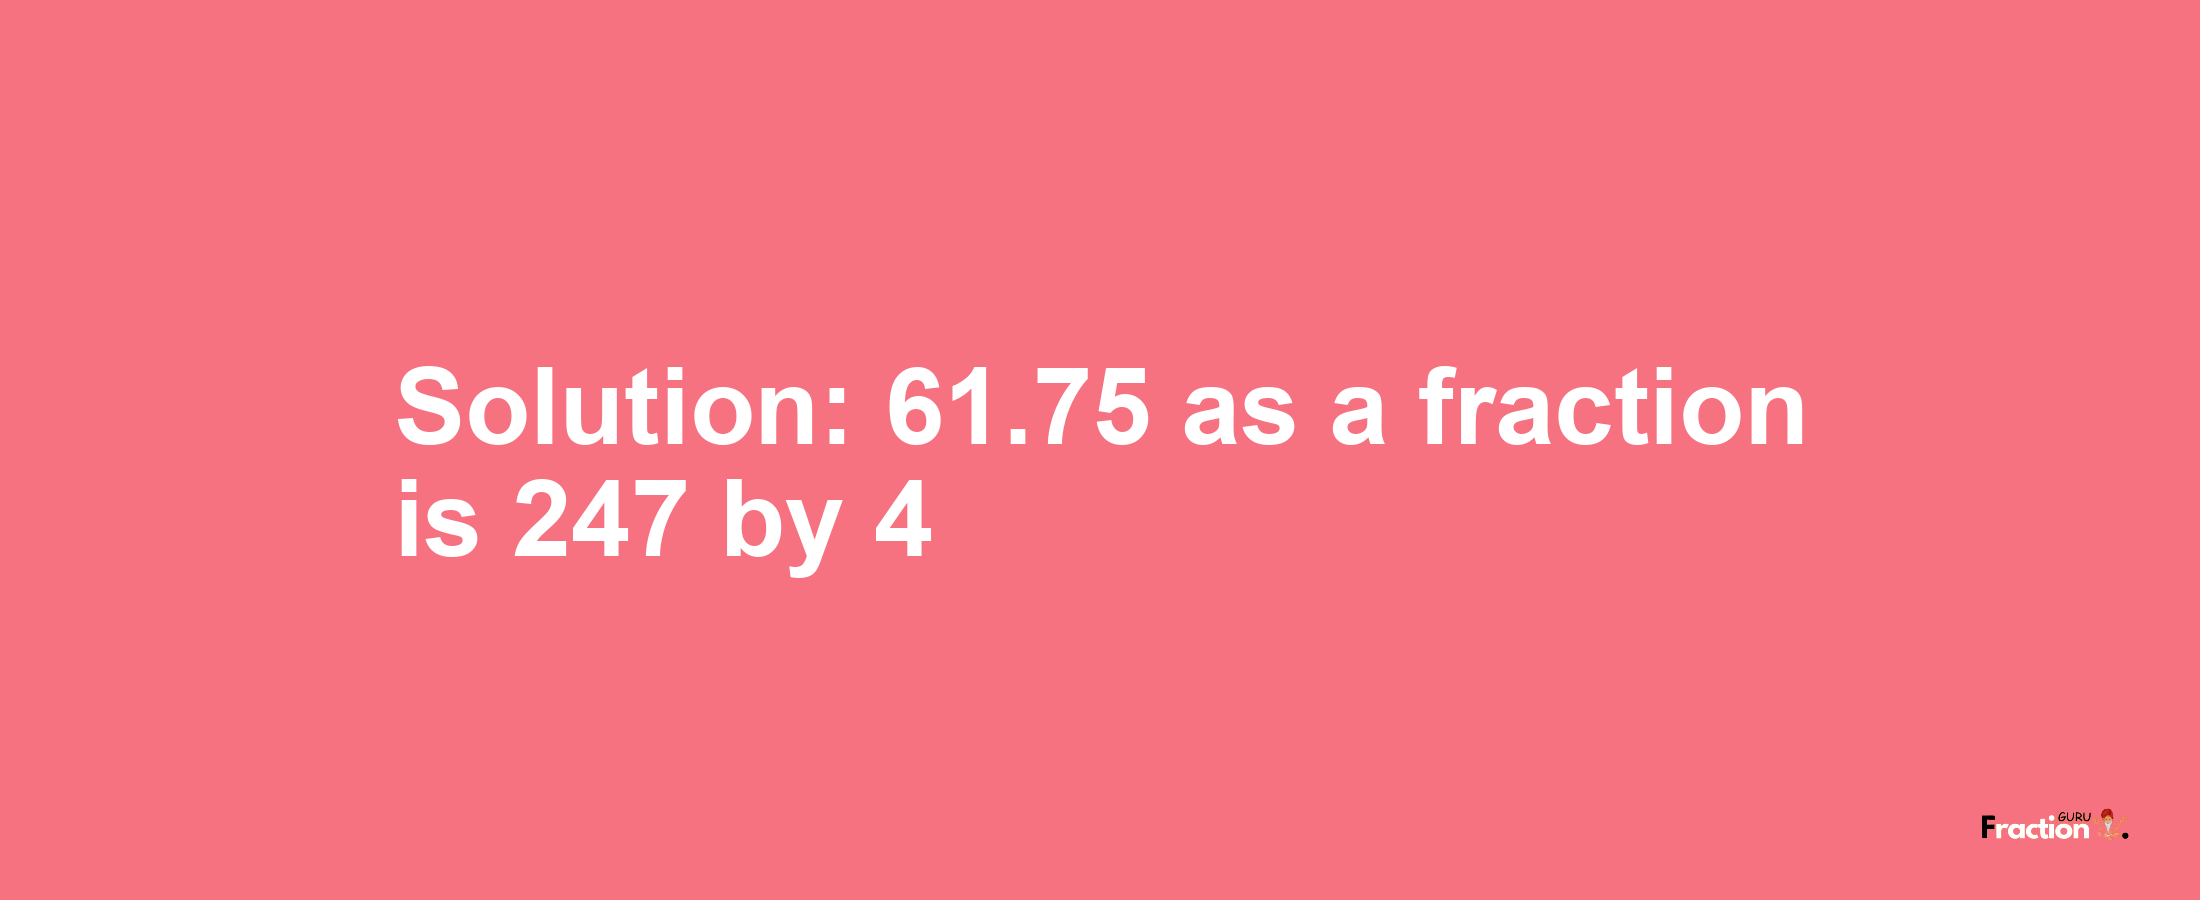 Solution:61.75 as a fraction is 247/4